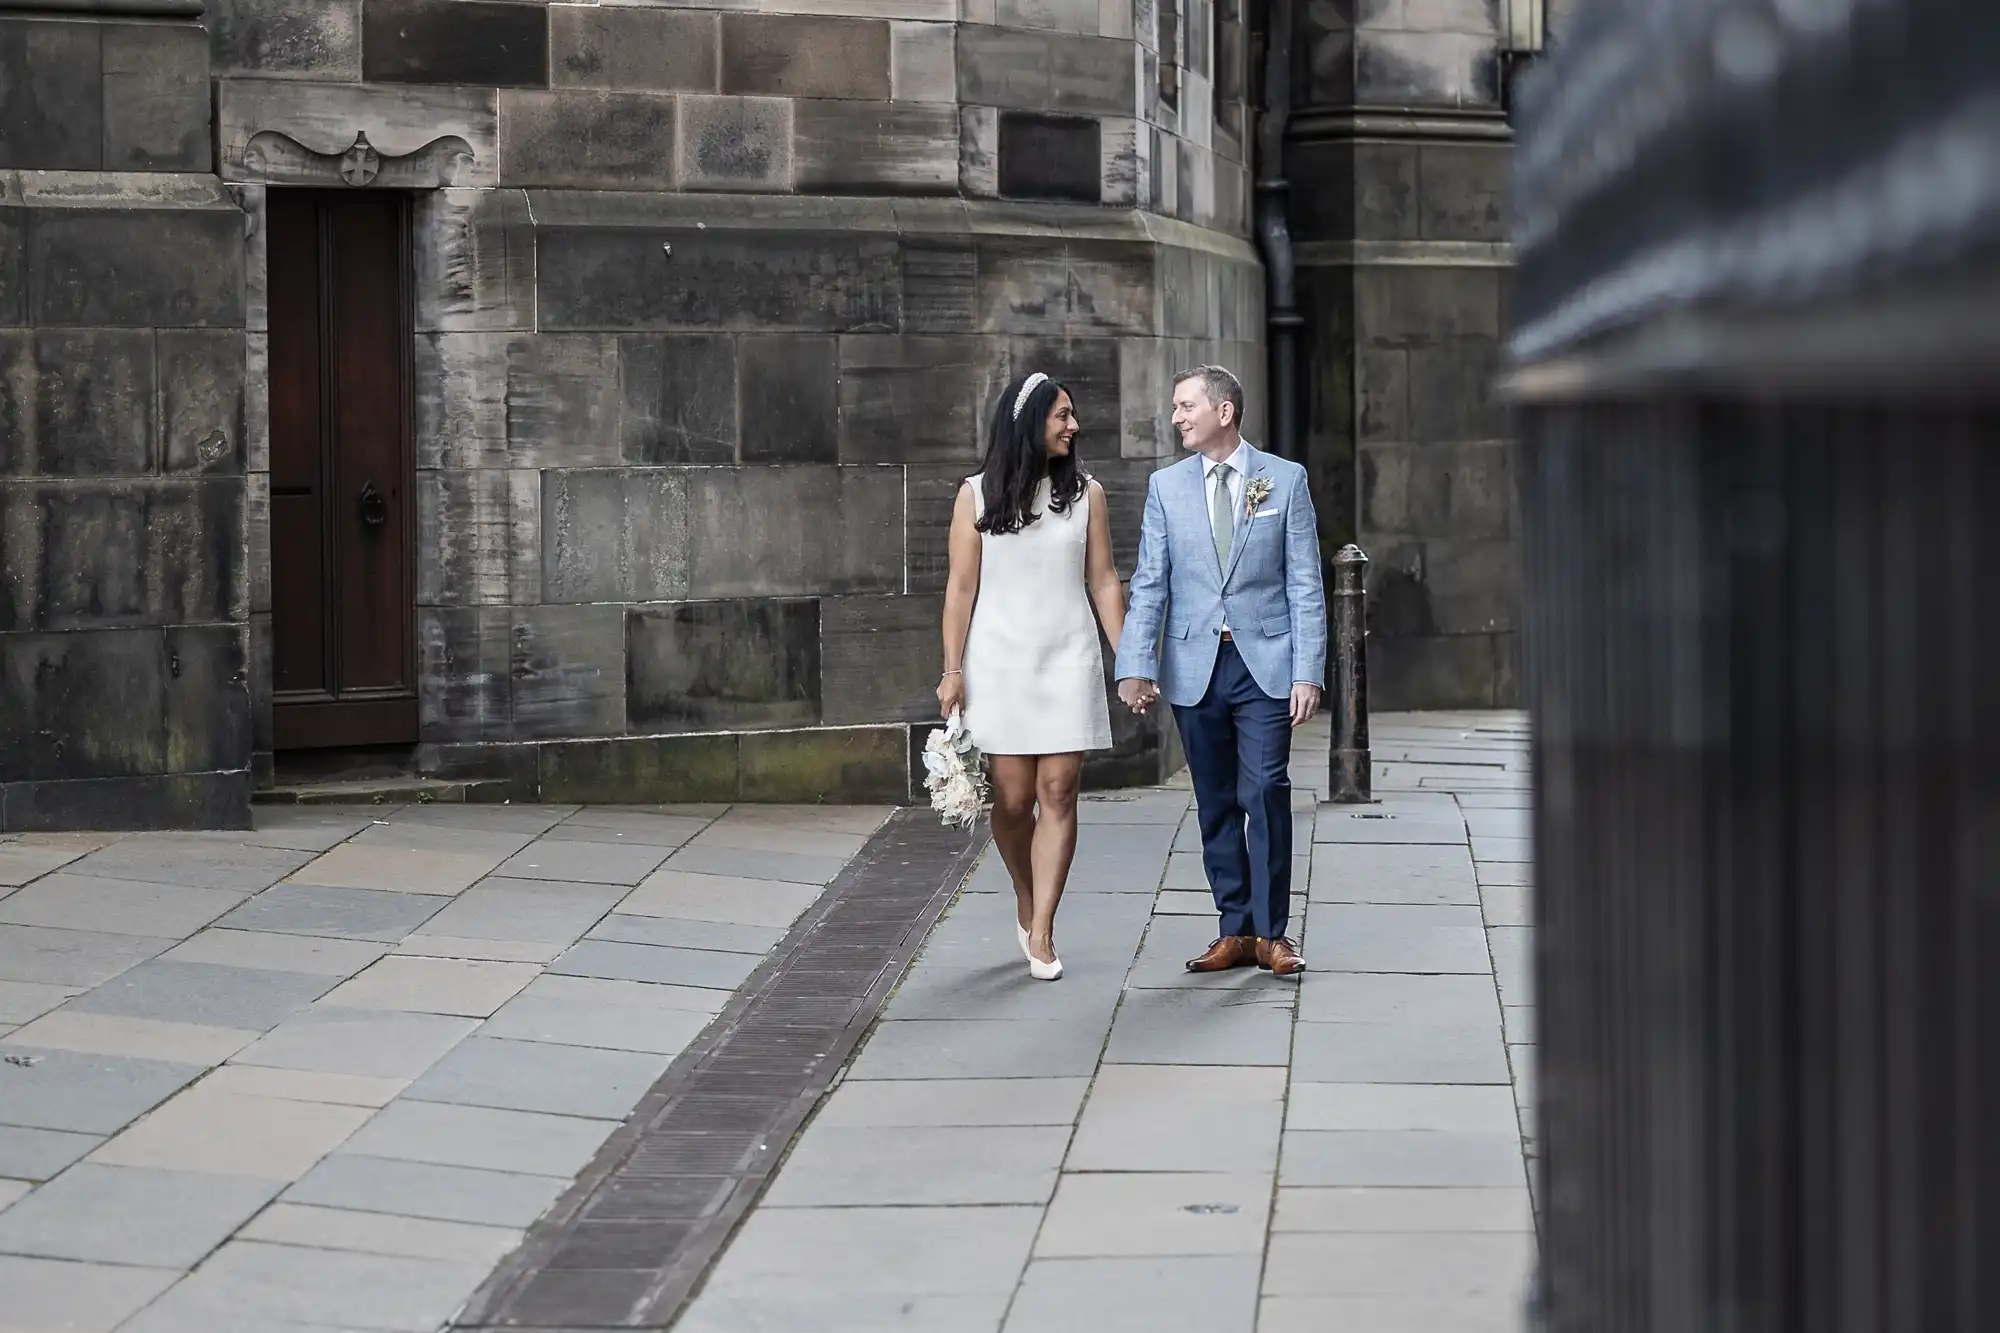 A couple holding hands walks on a stone pavement near a historic building. The woman wears a white dress and holds flowers, while the man is in a light blue suit.